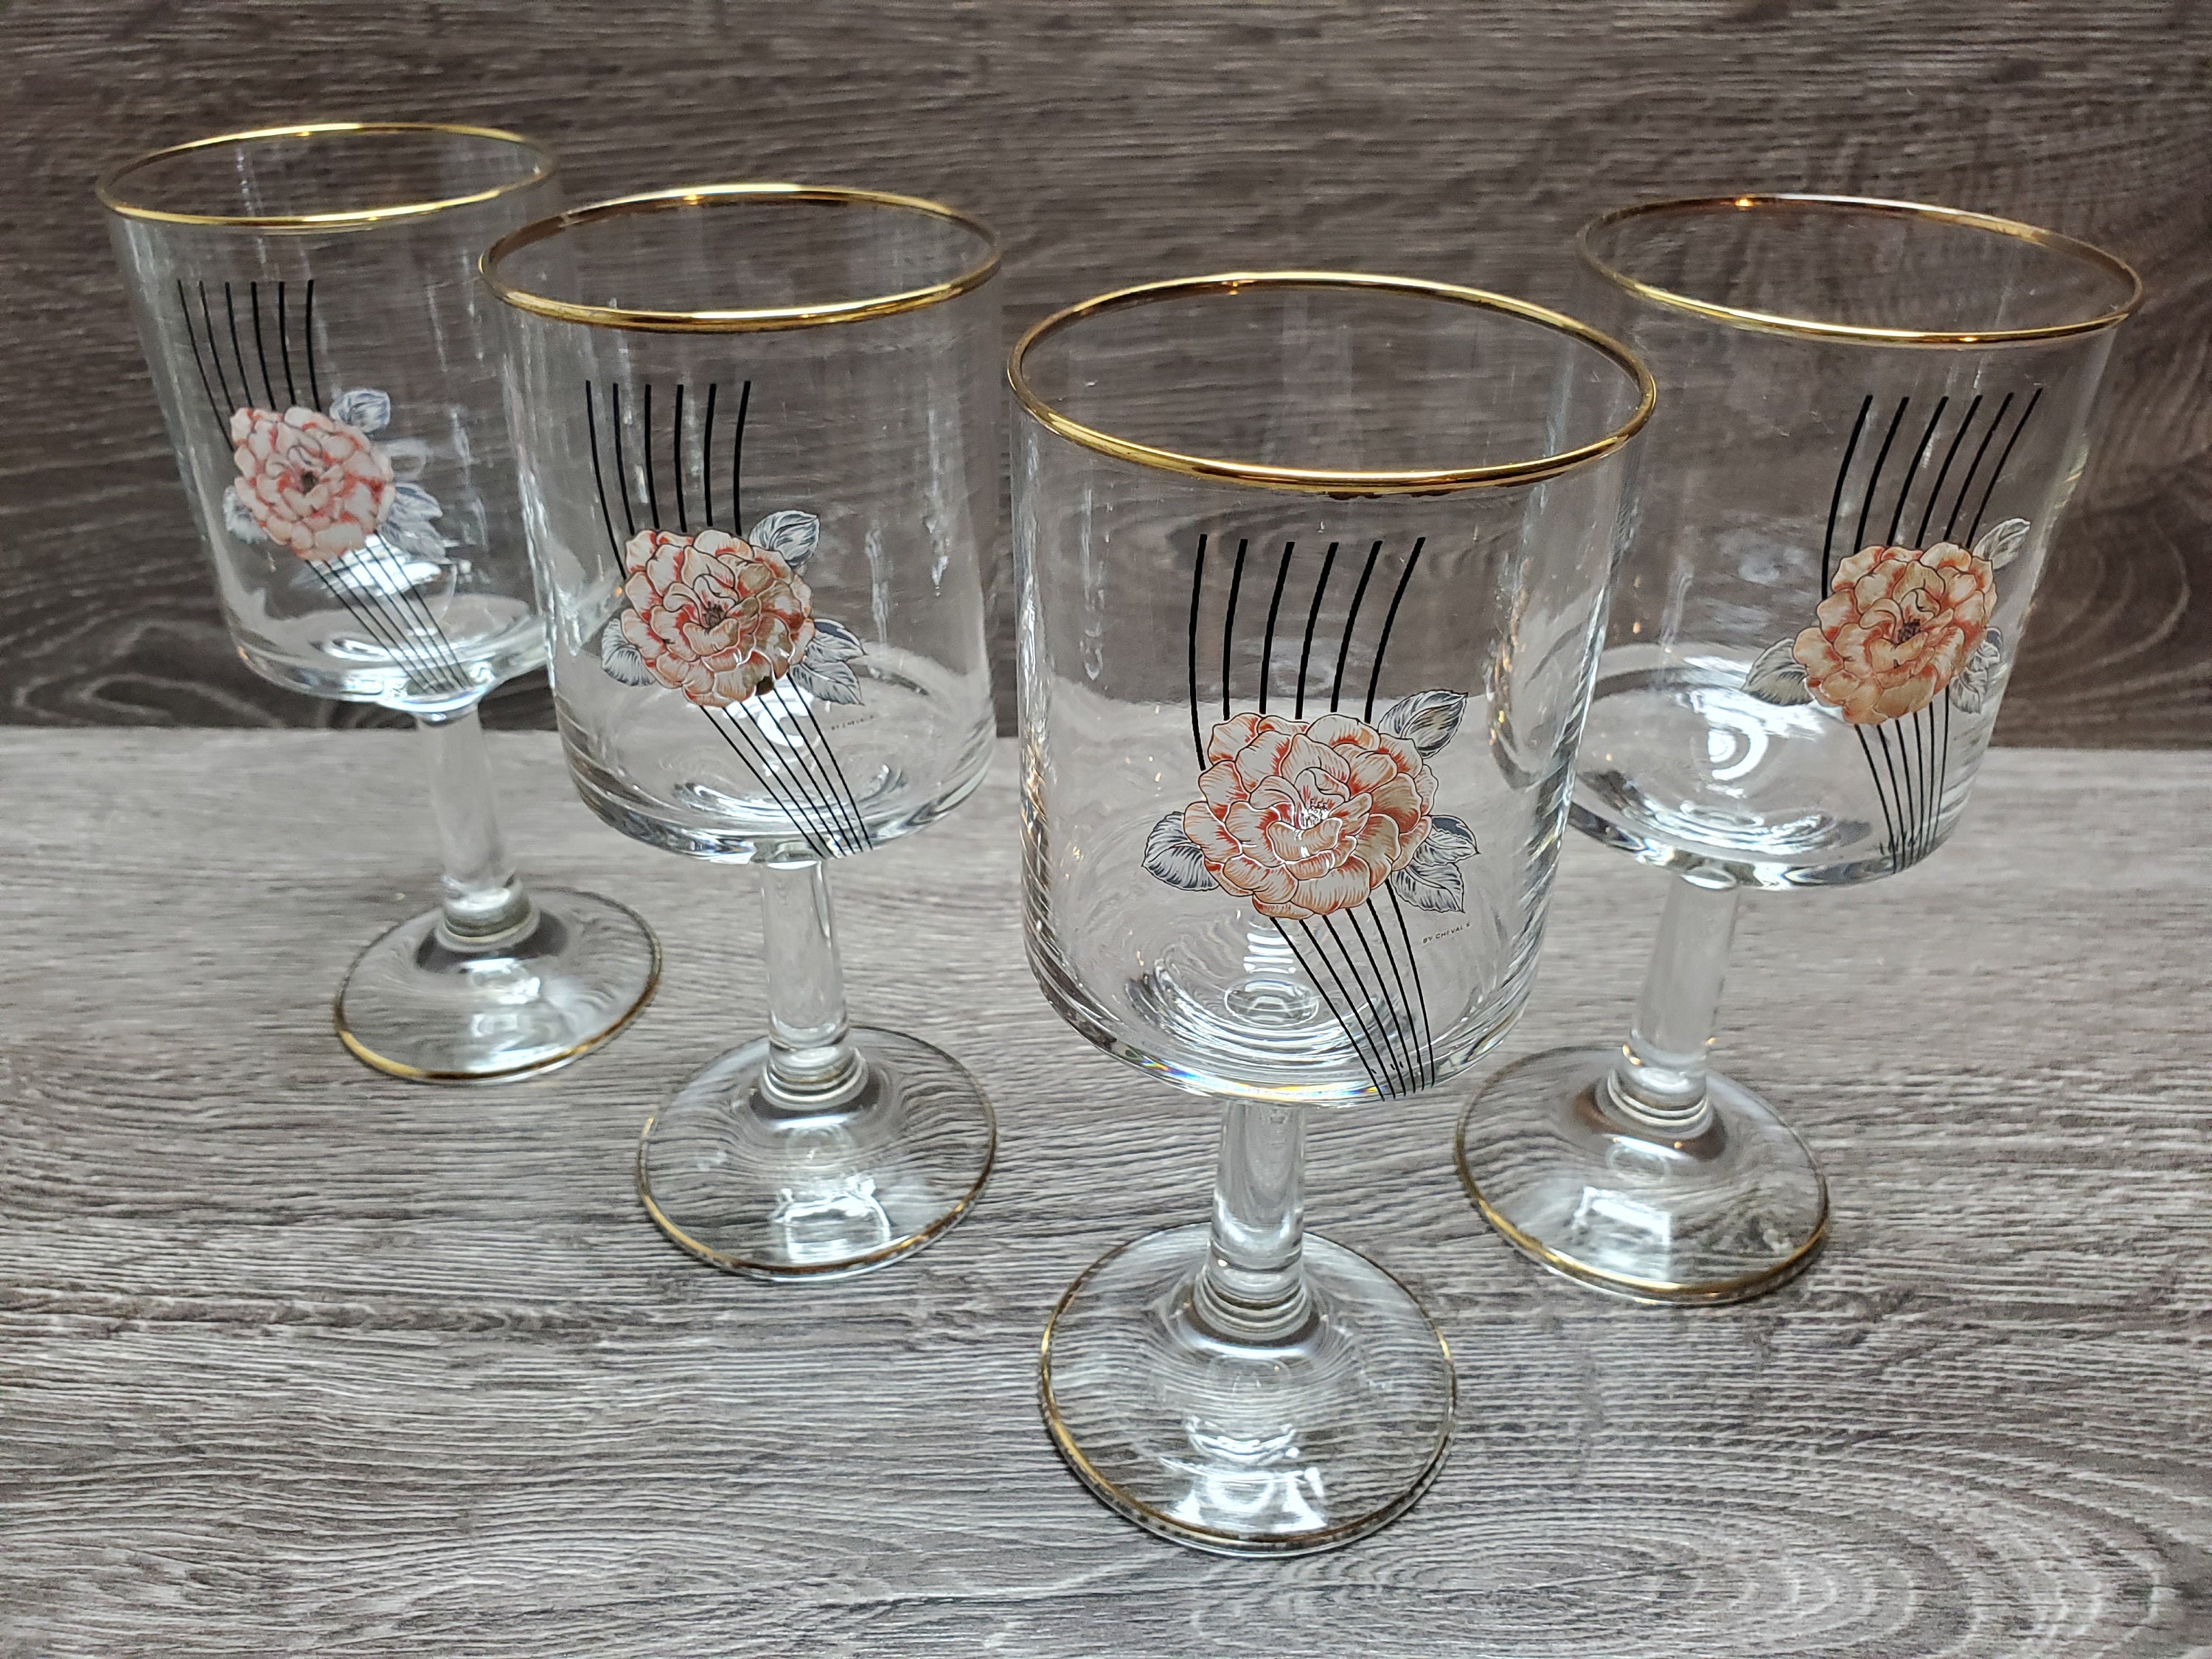 CREATIVELAND Colored Vintage Drinking Glasses Set of 4, 15.5 oz Romantic  Embossed Water Glasses, Col…See more CREATIVELAND Colored Vintage Drinking